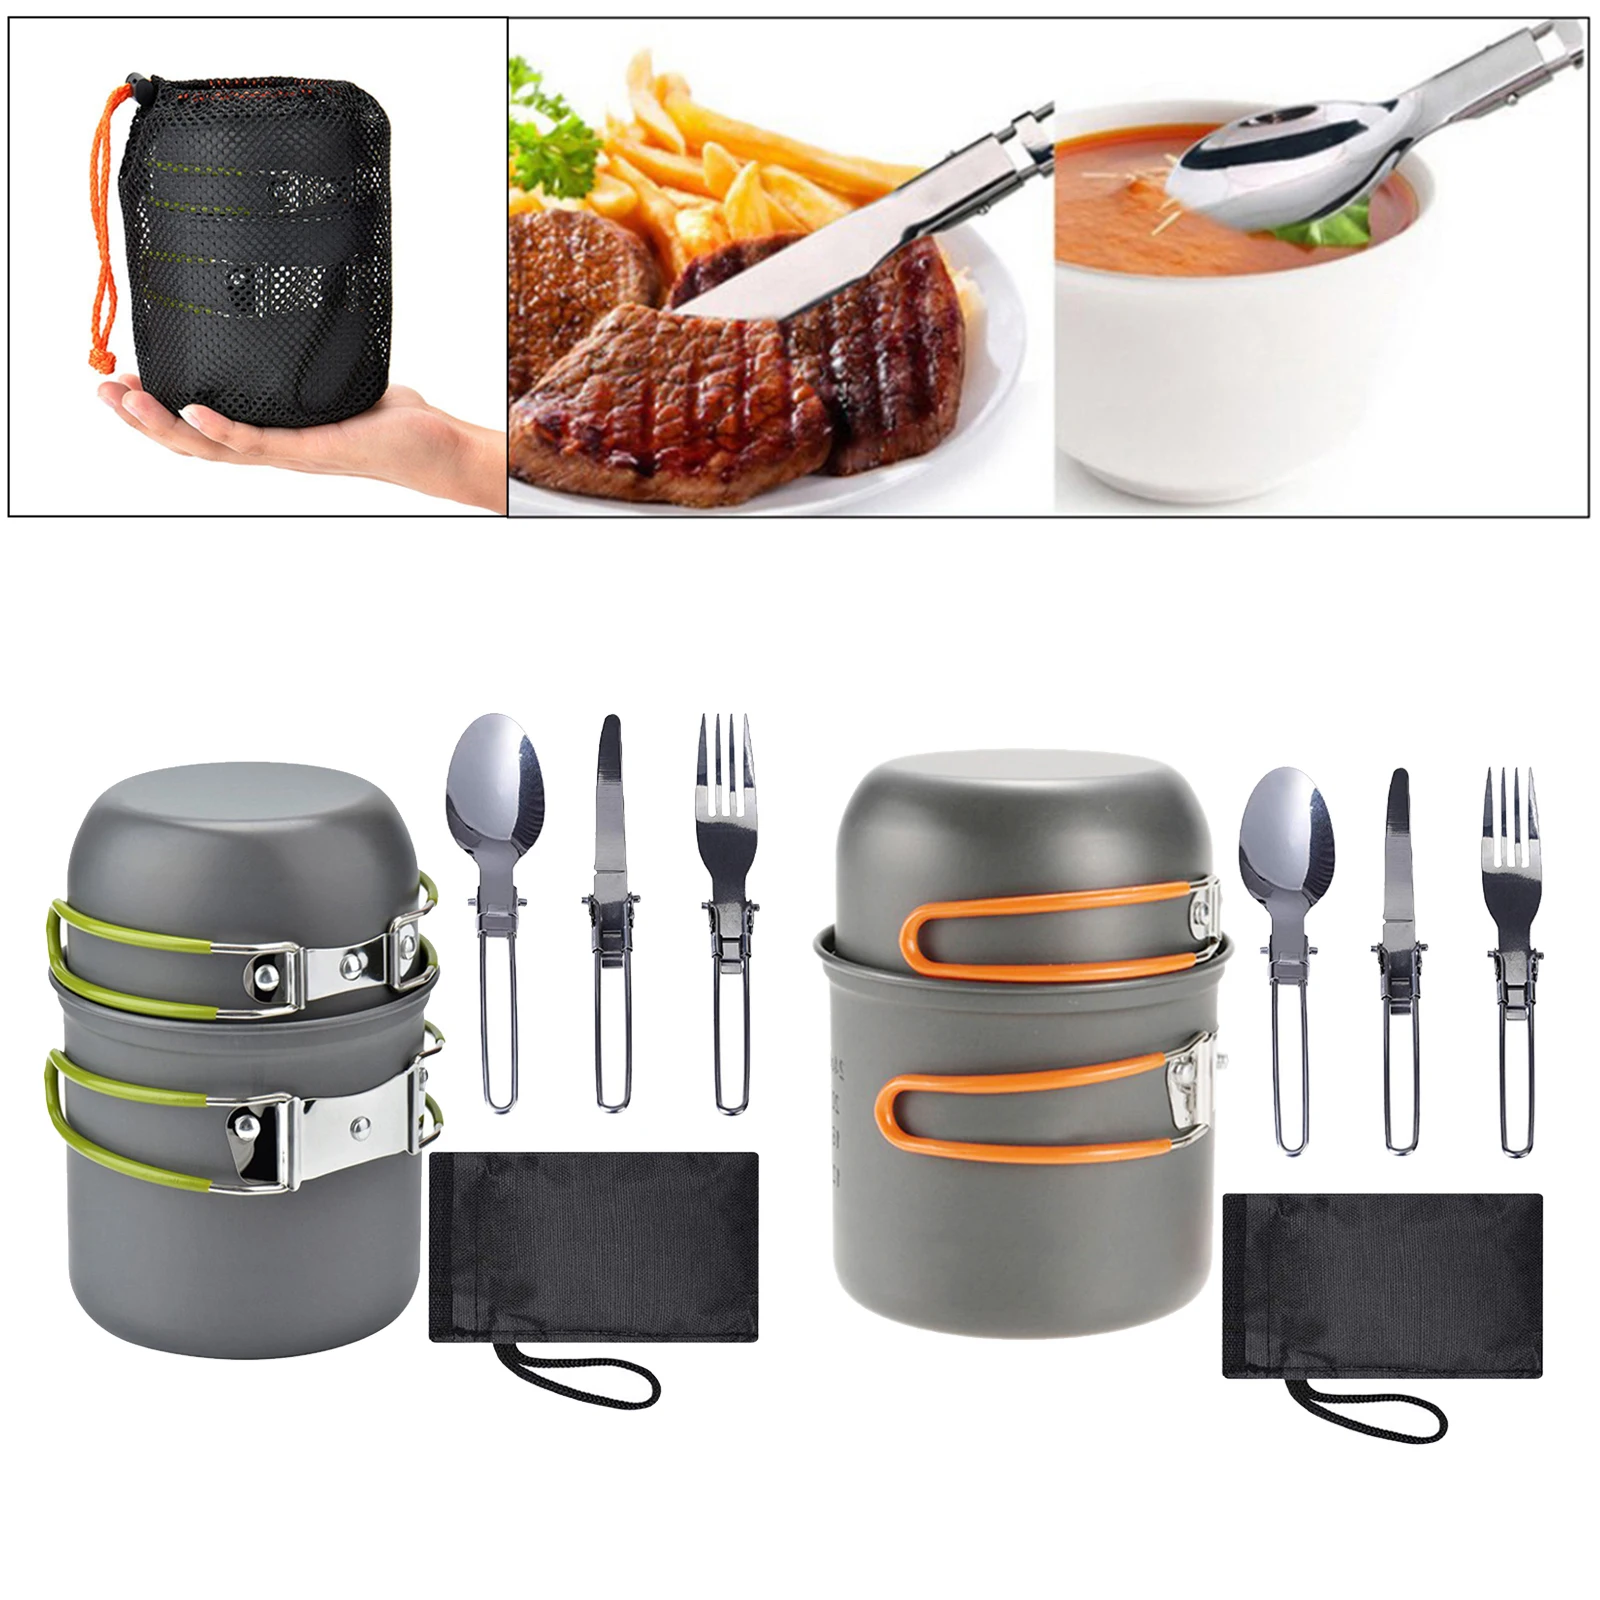 Camping Cookware Picnic Mess Kit Outdoor Pan Cup Knife Cooker W/ Carry Bag